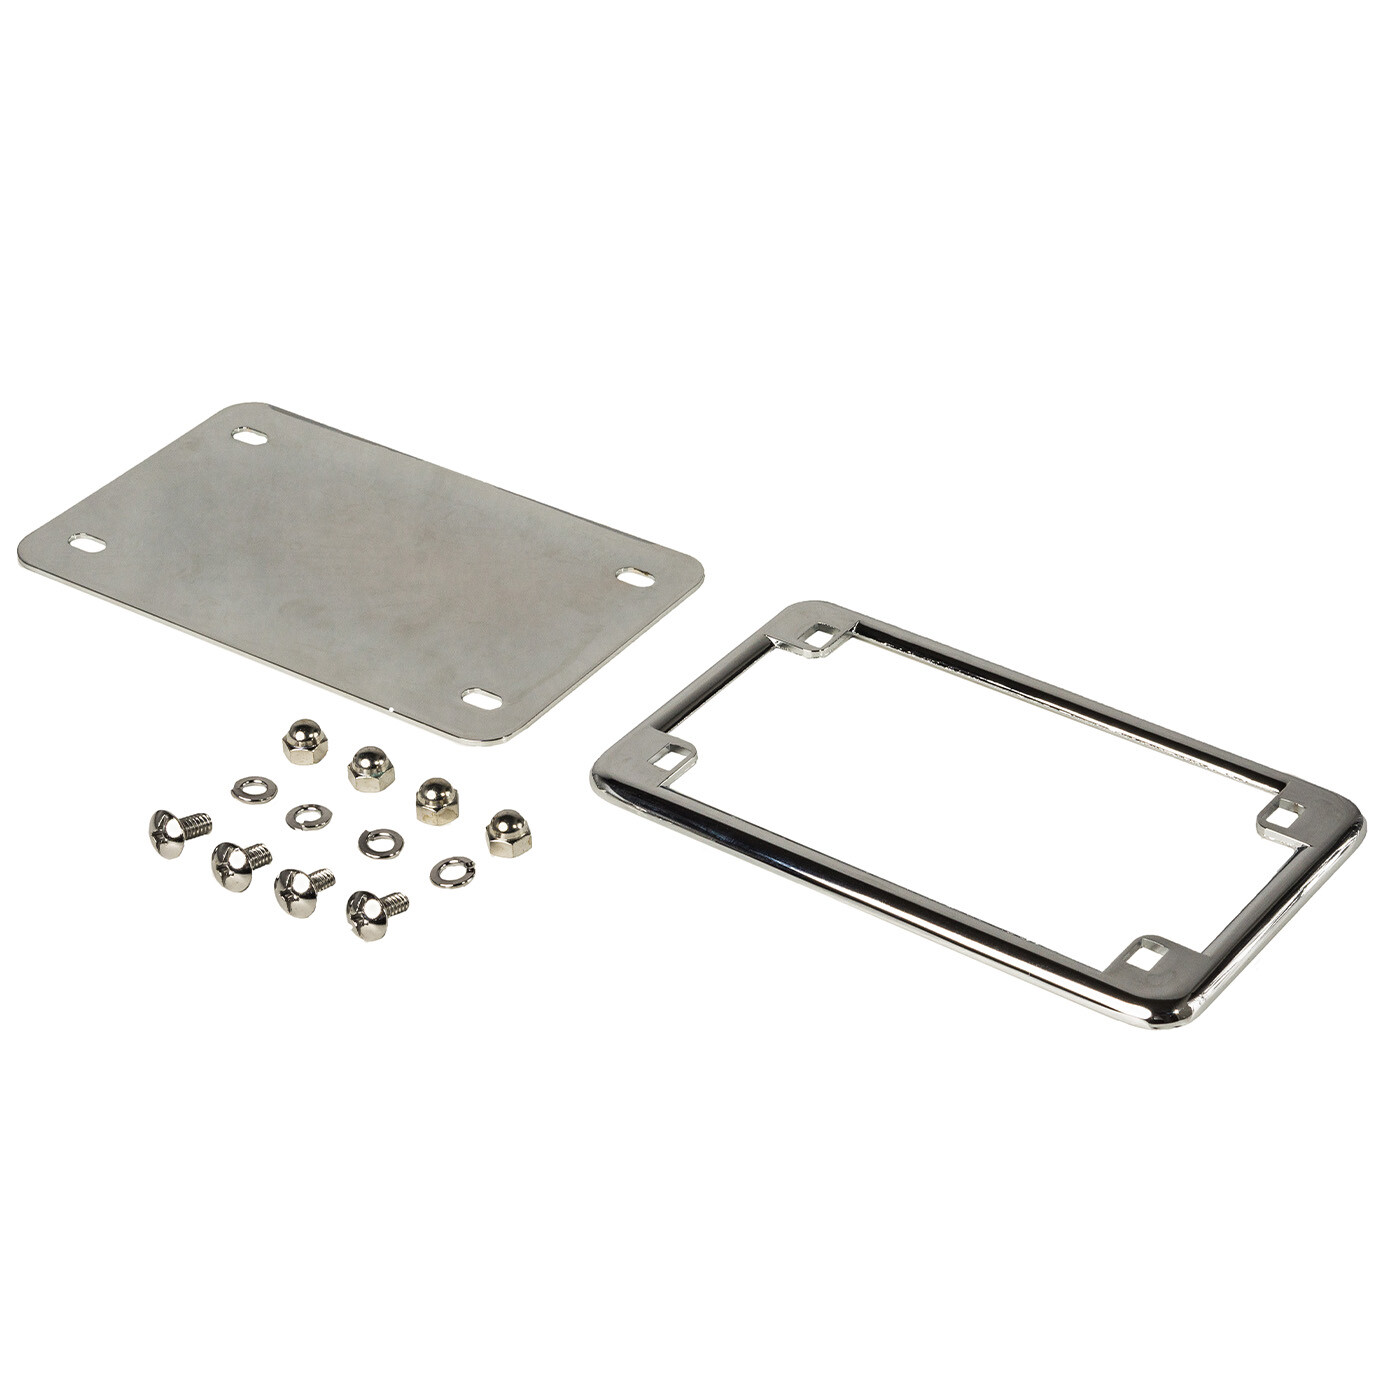 360 Twin™ License Plate Frame and Backing Plate